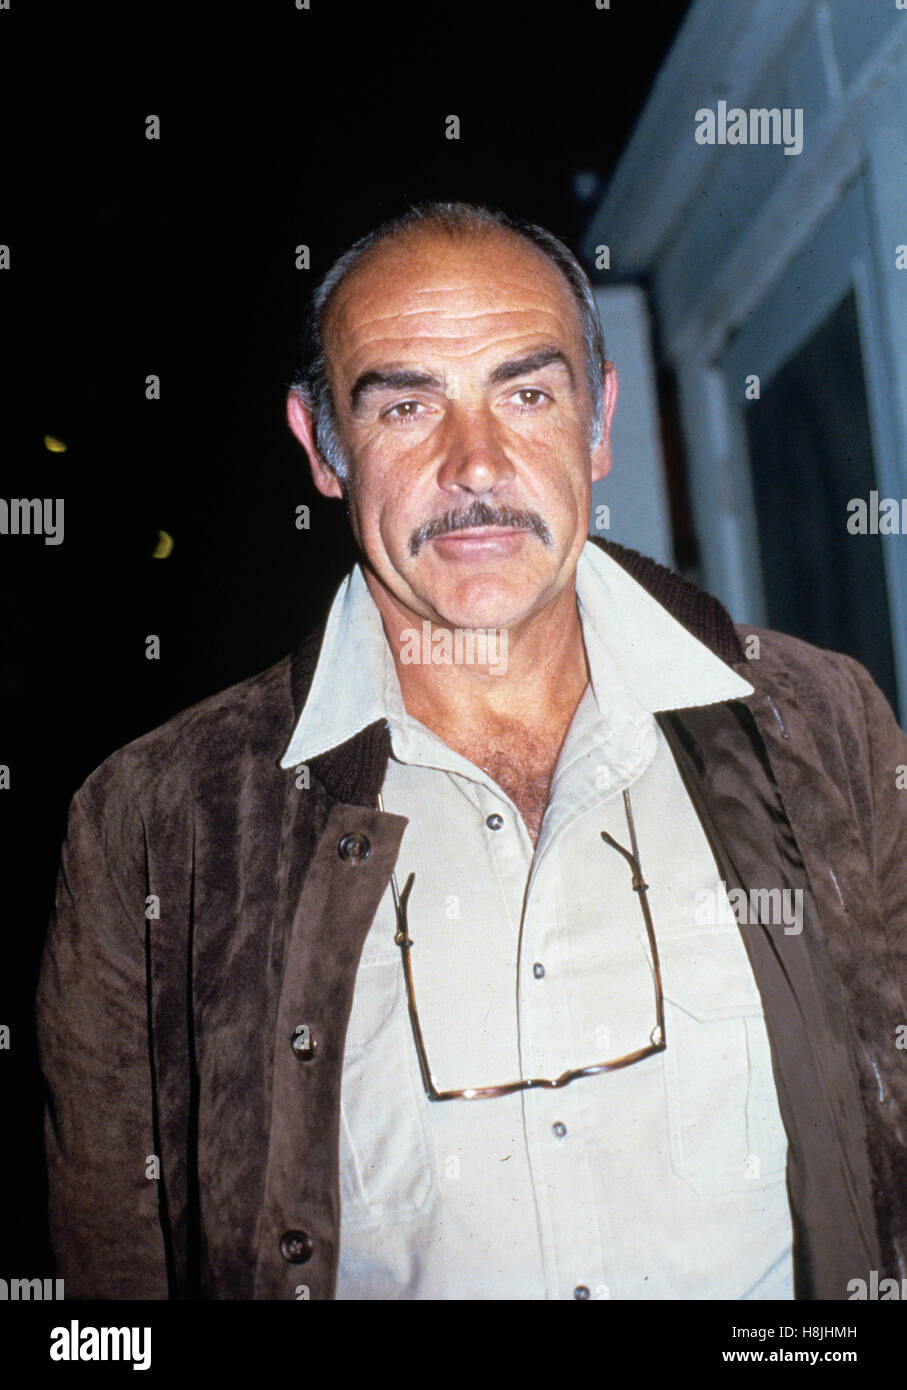 sean-connery-in-the-1980s-rtmcbride-mediapunch-H8JHMH.jpg